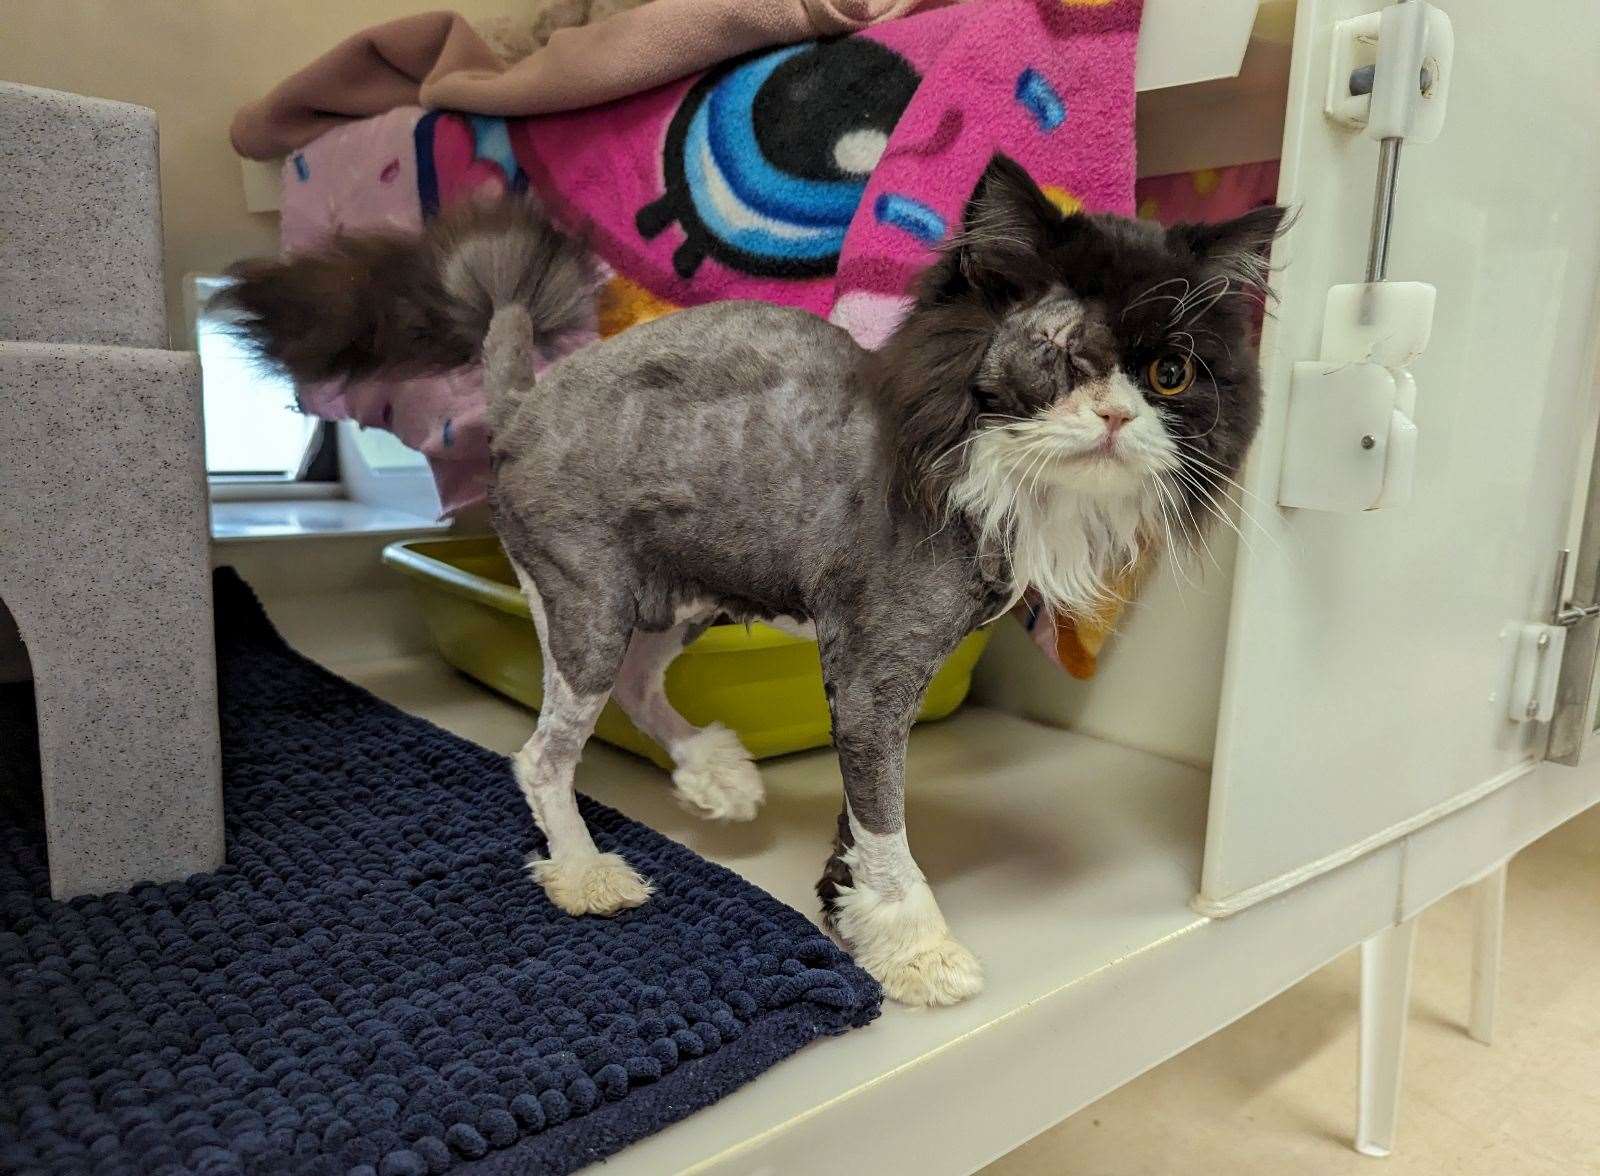 Poor Freya had to have her eye removed and her fur shaved. Picture: RSPCA